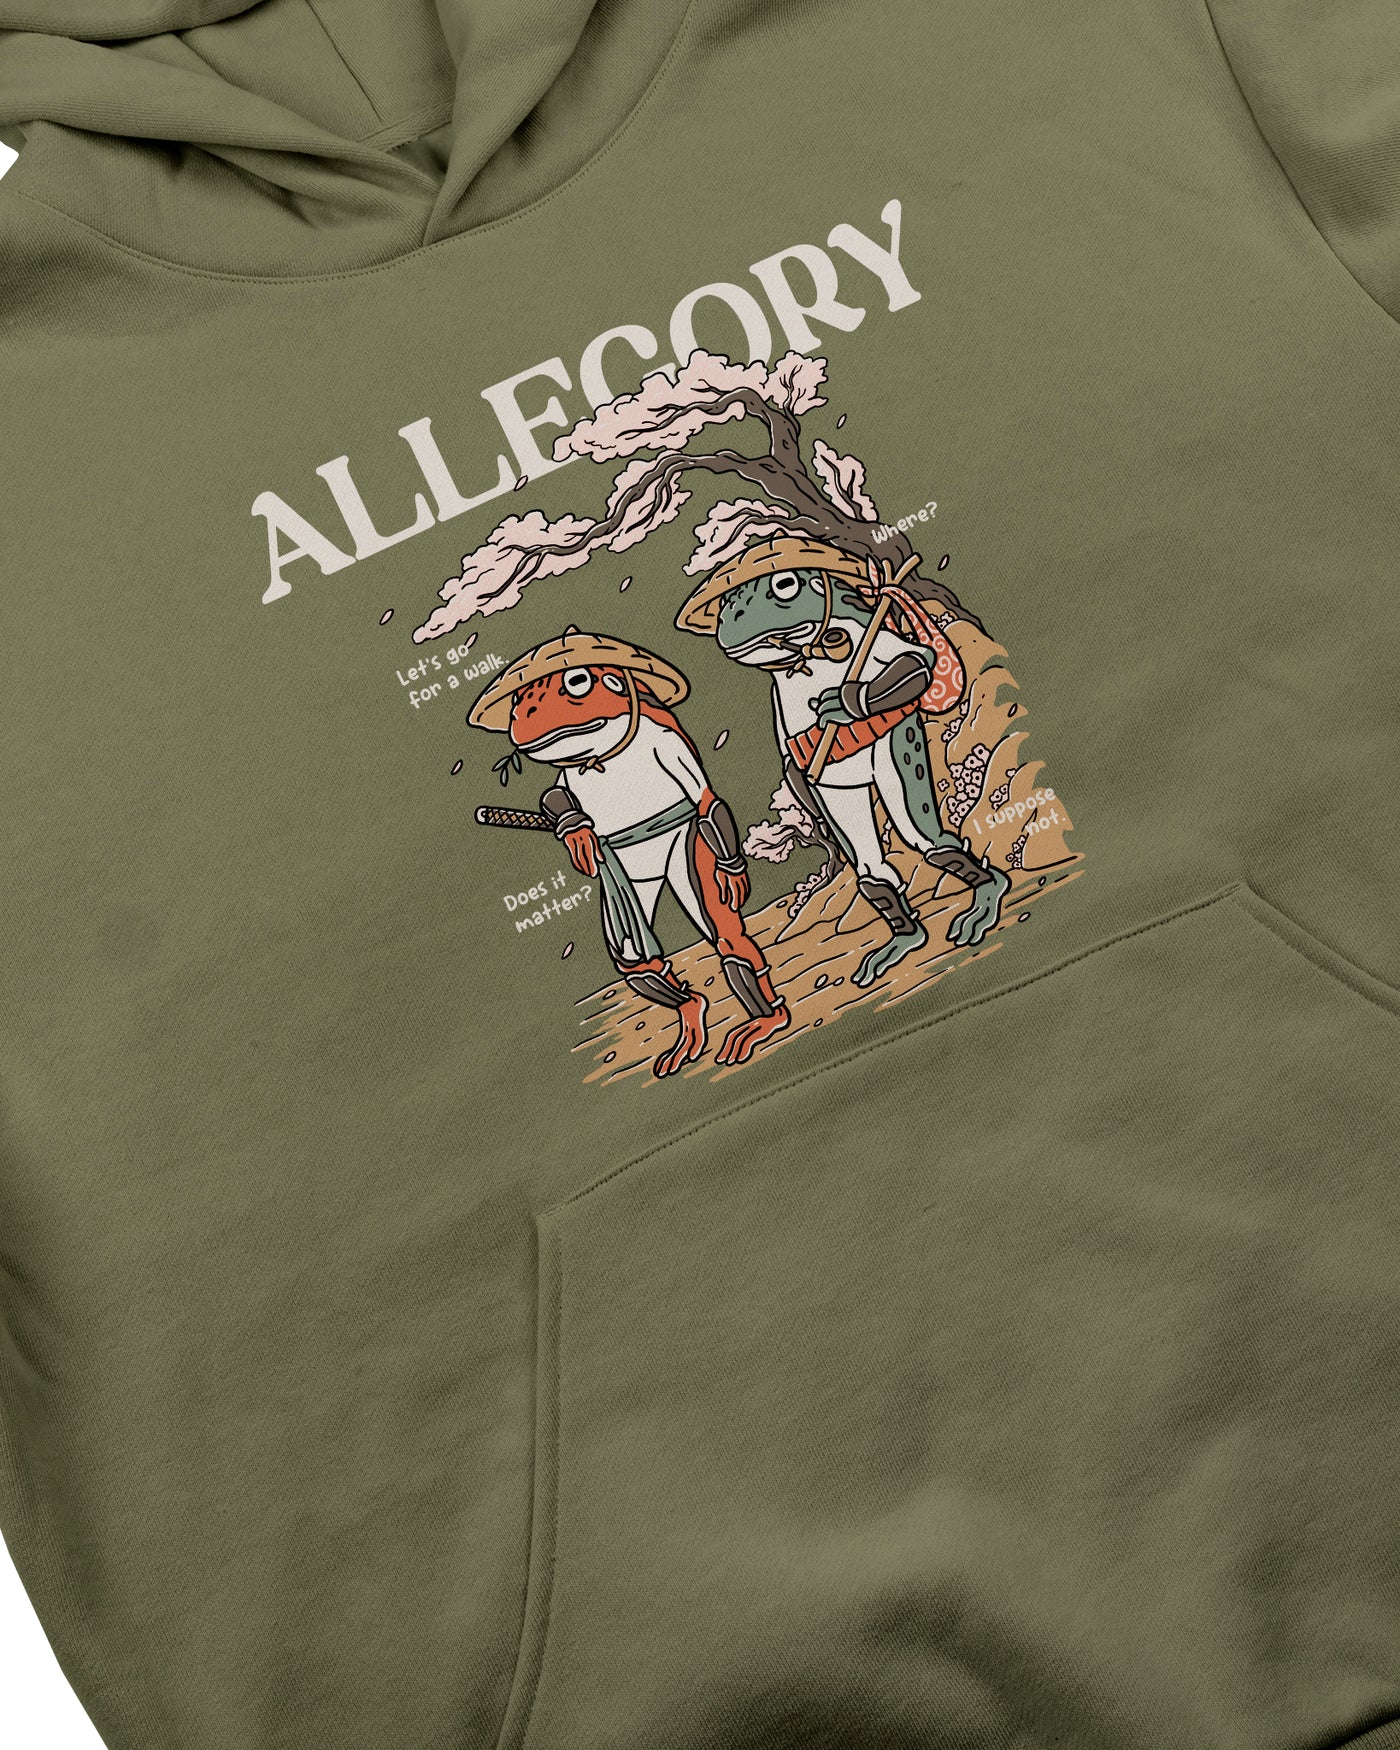 Let's Go For A Walk Heavyweight Hoodie / Slice of Life / Forest Green